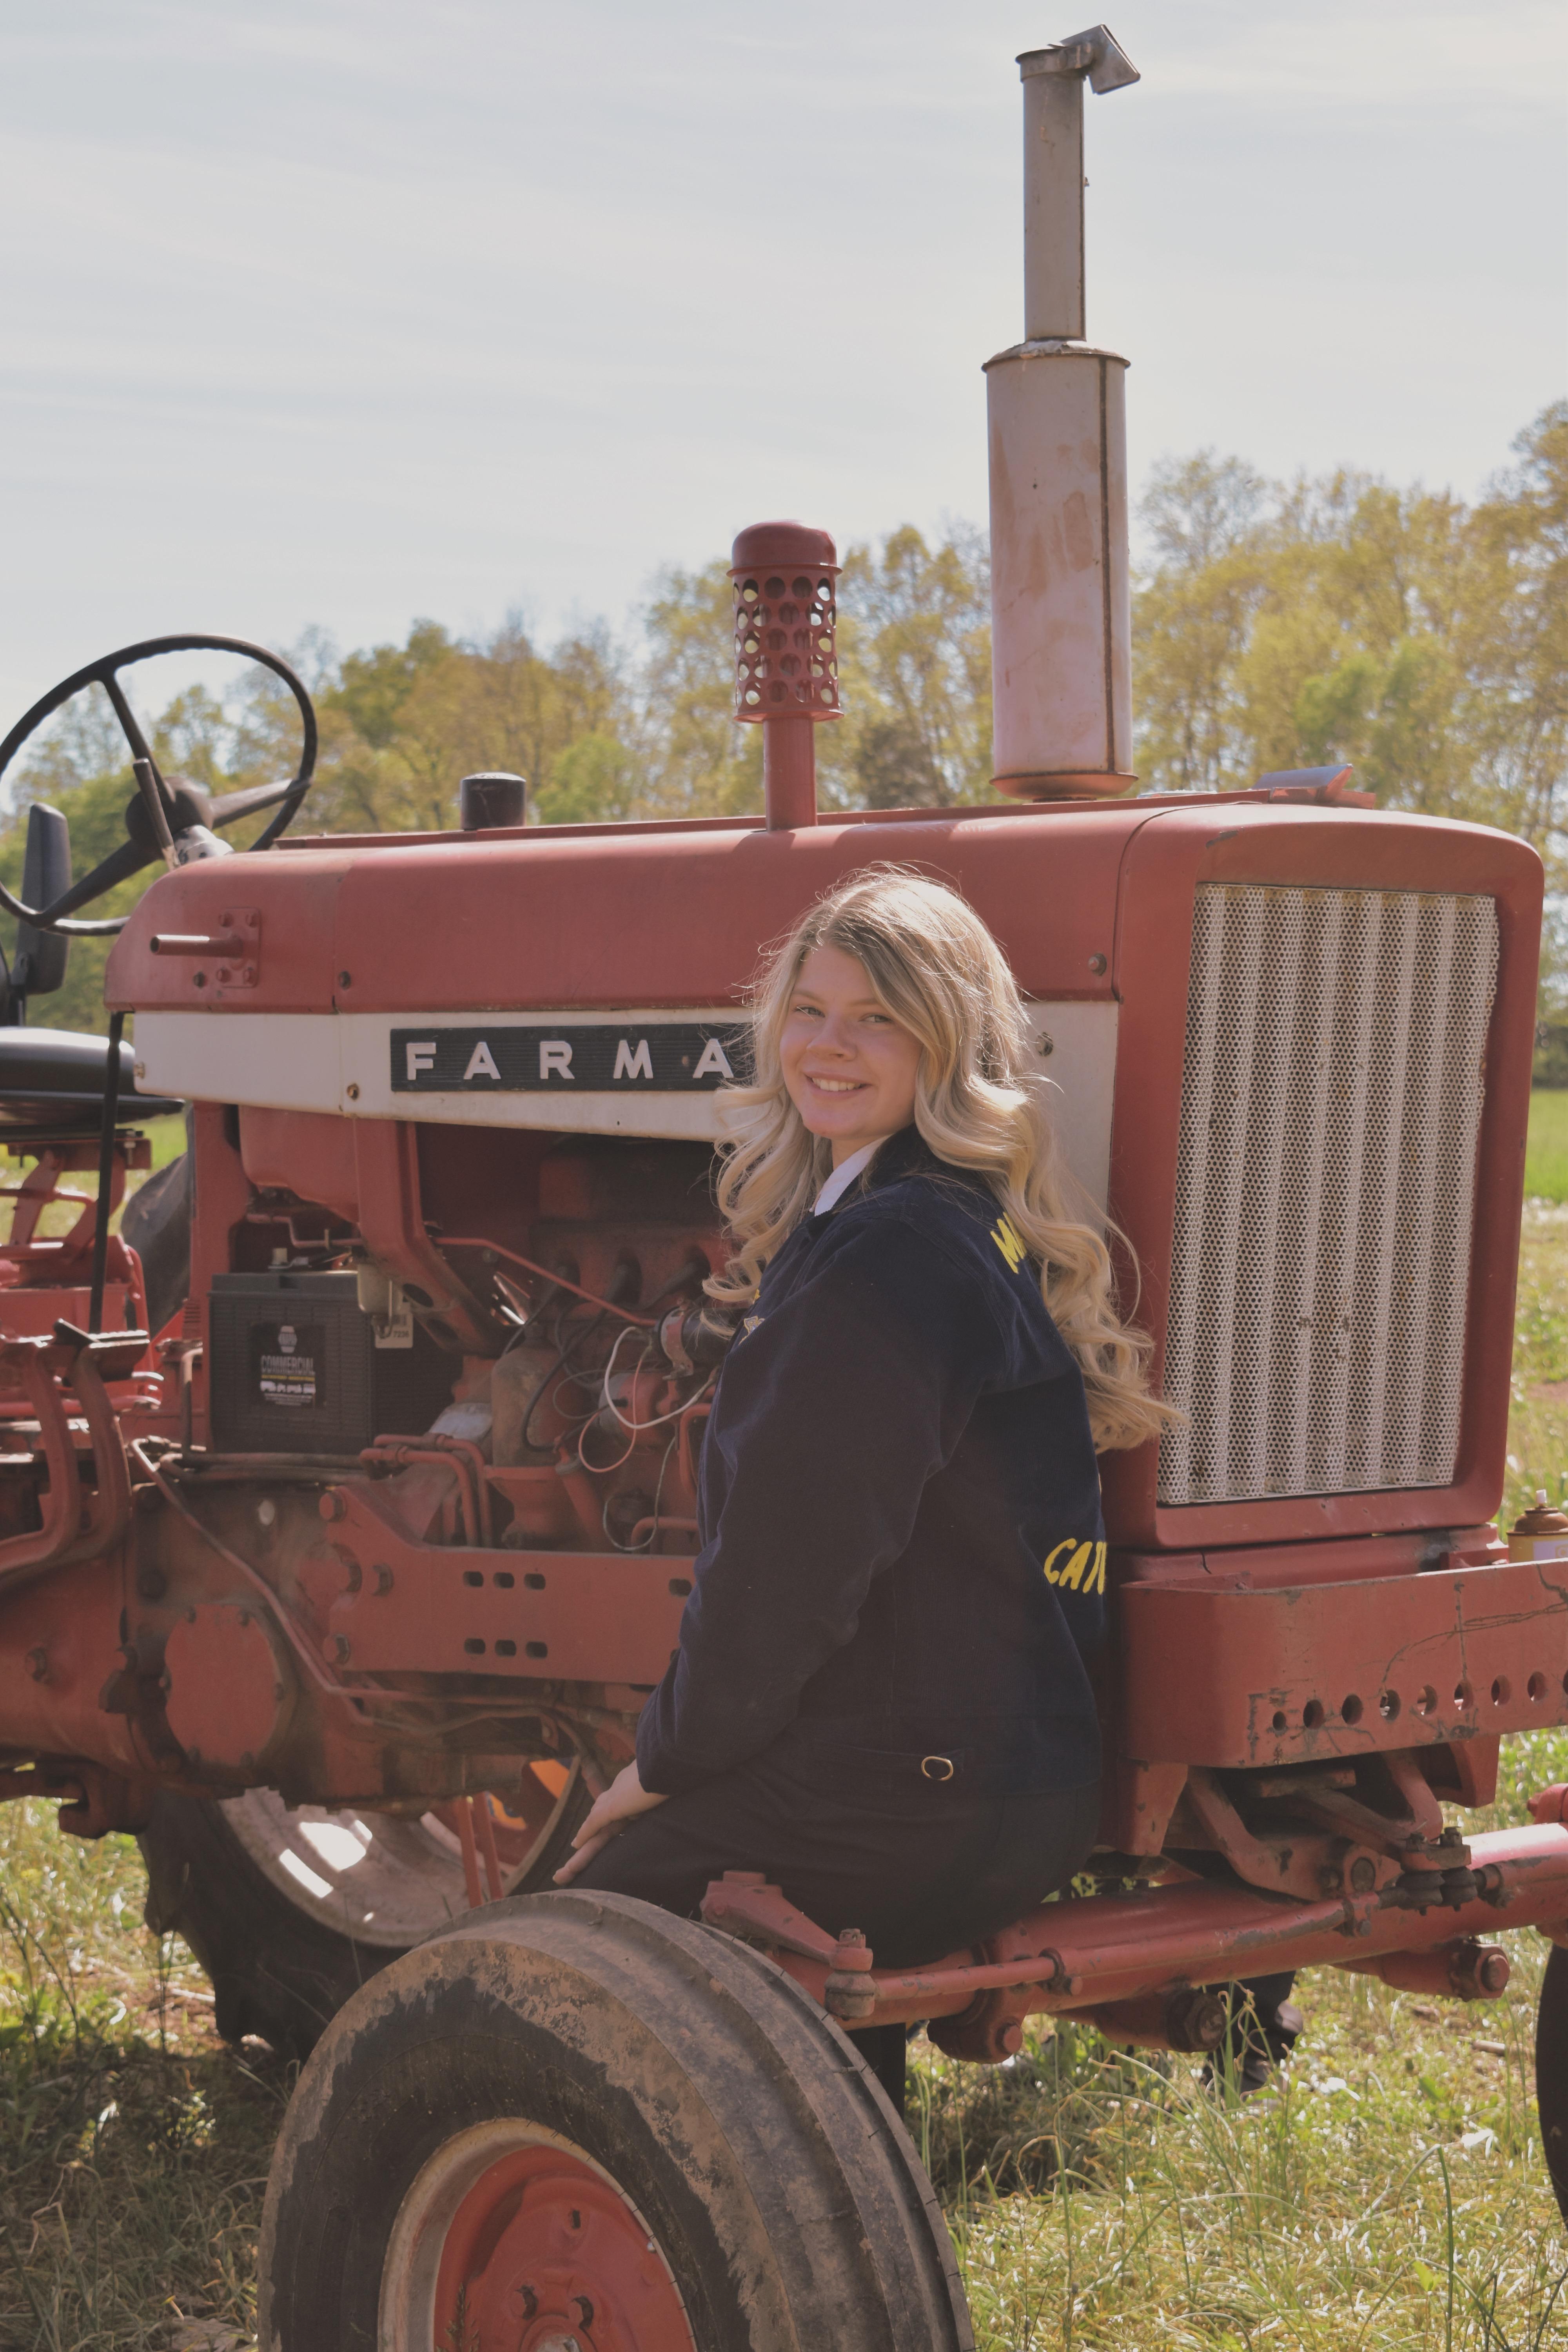 Cheyenne Van Echo. Happy student wearing an FFA jacket and posing with Farmall tractor.